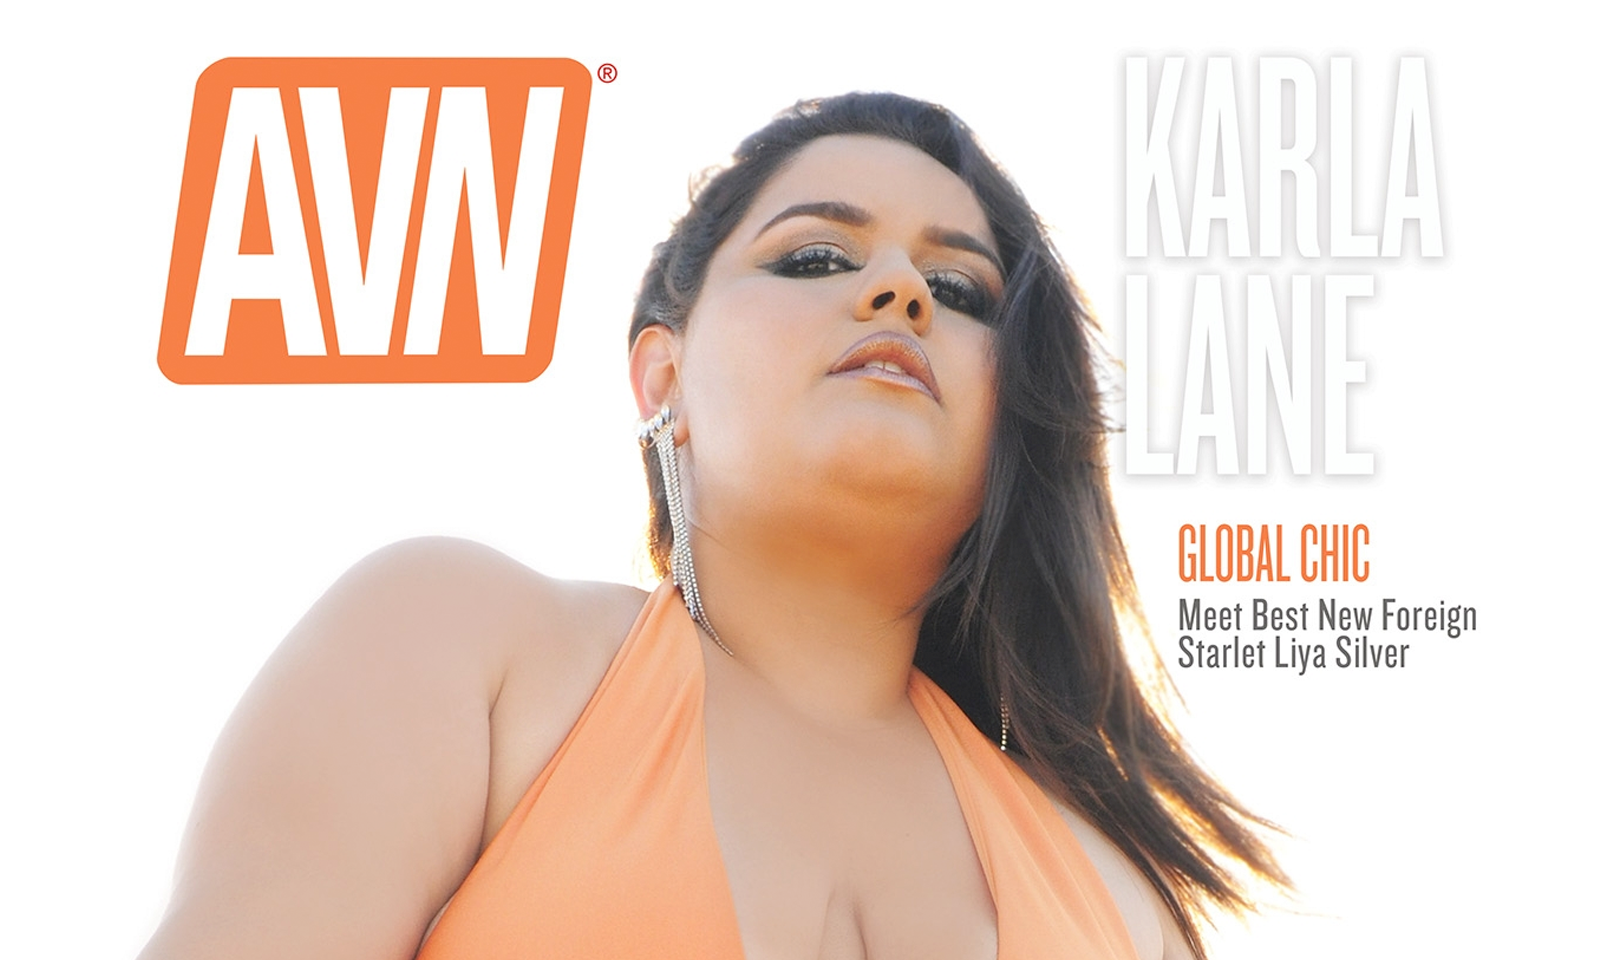 Newest AVN Magazine Features Karla Lane on Cover